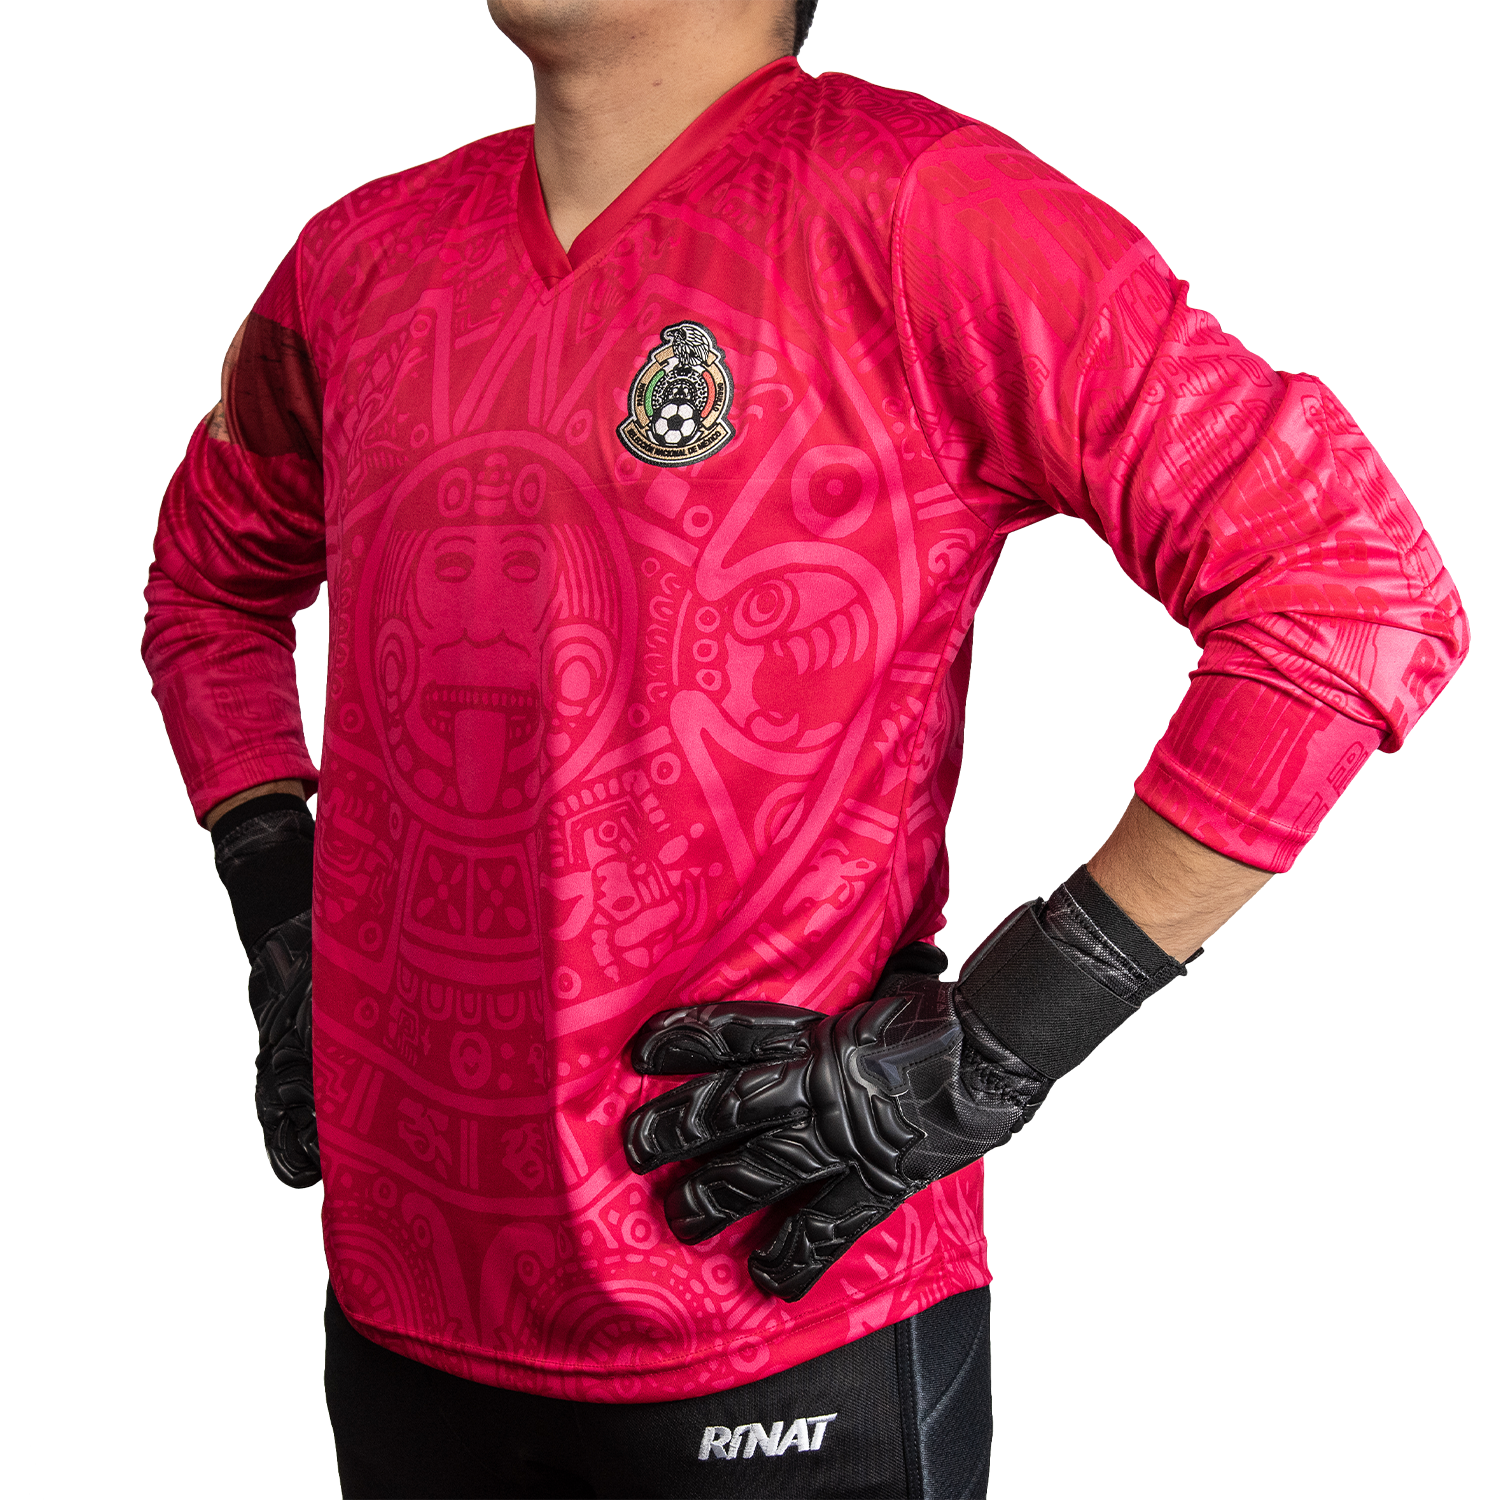 Mexico 98 Pink Retro Goalkeeper Jersey by Geko Sports Limited Edition 3